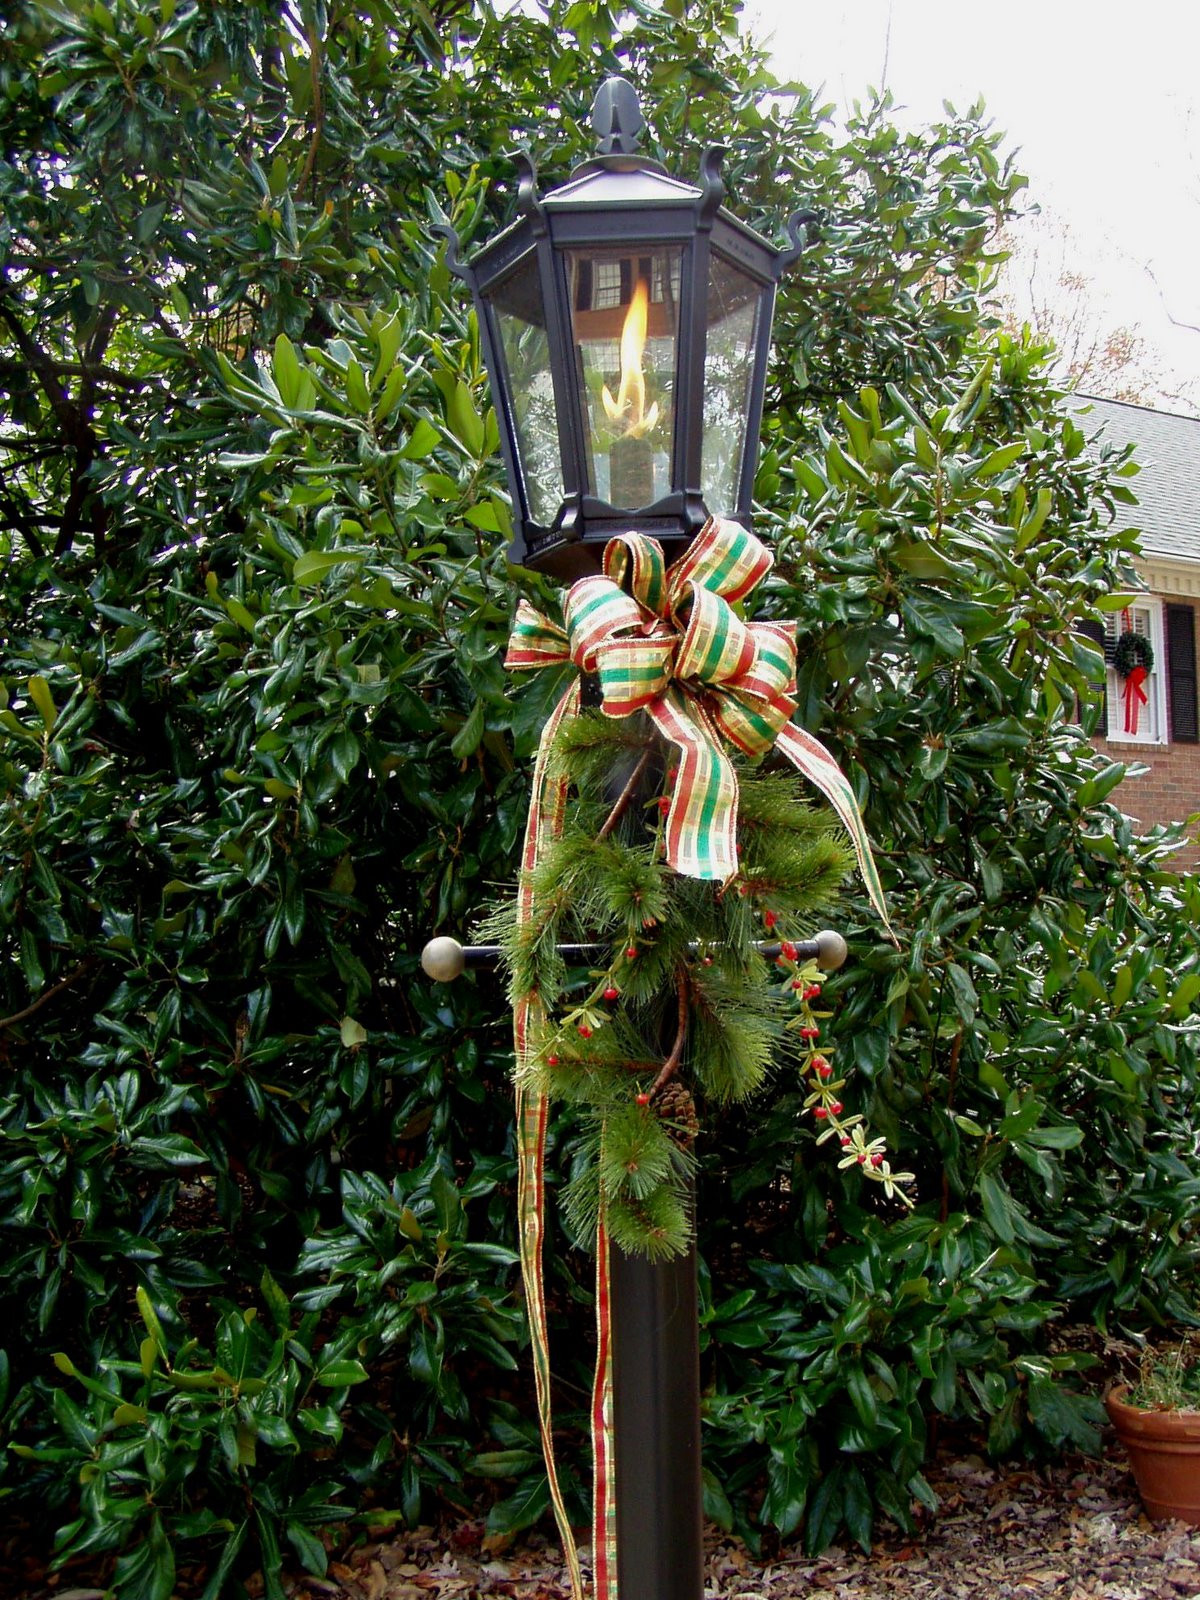 Outdoor Christmas Lamp Post Decoration
 Decorate for a Traditional Christmas